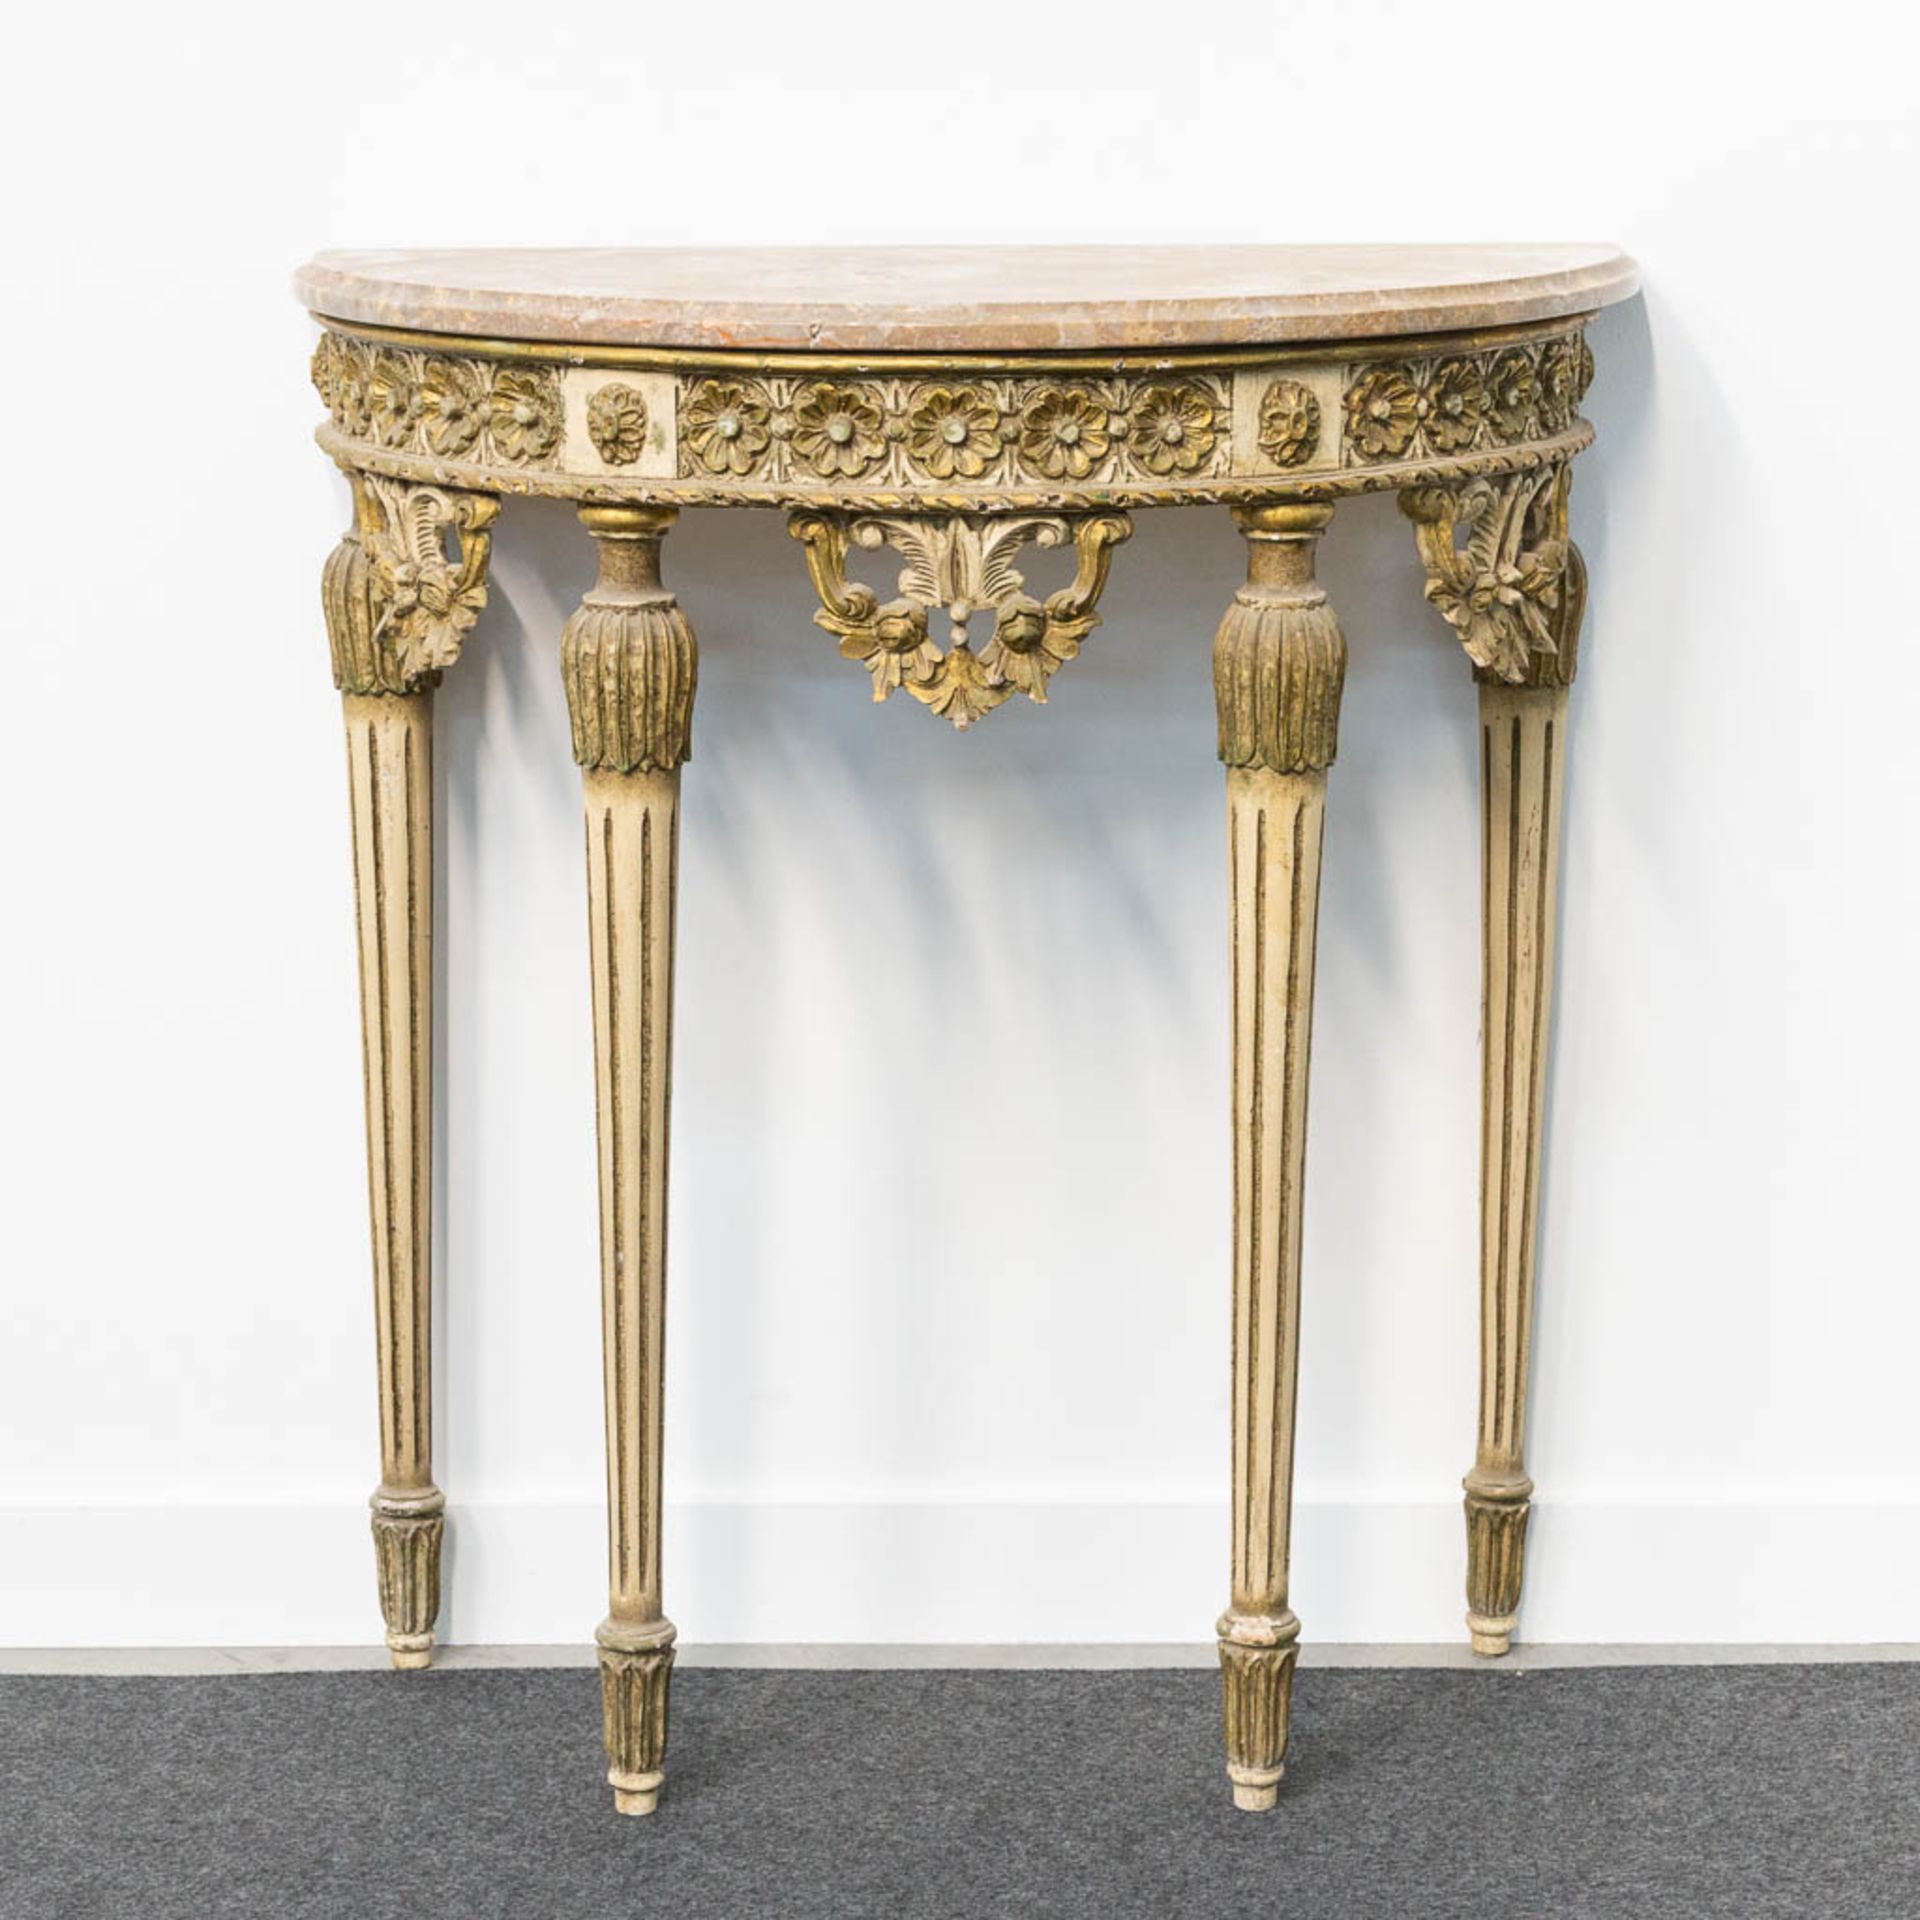 A Louis XVI style console table with marble top and sculptured wood decorations.